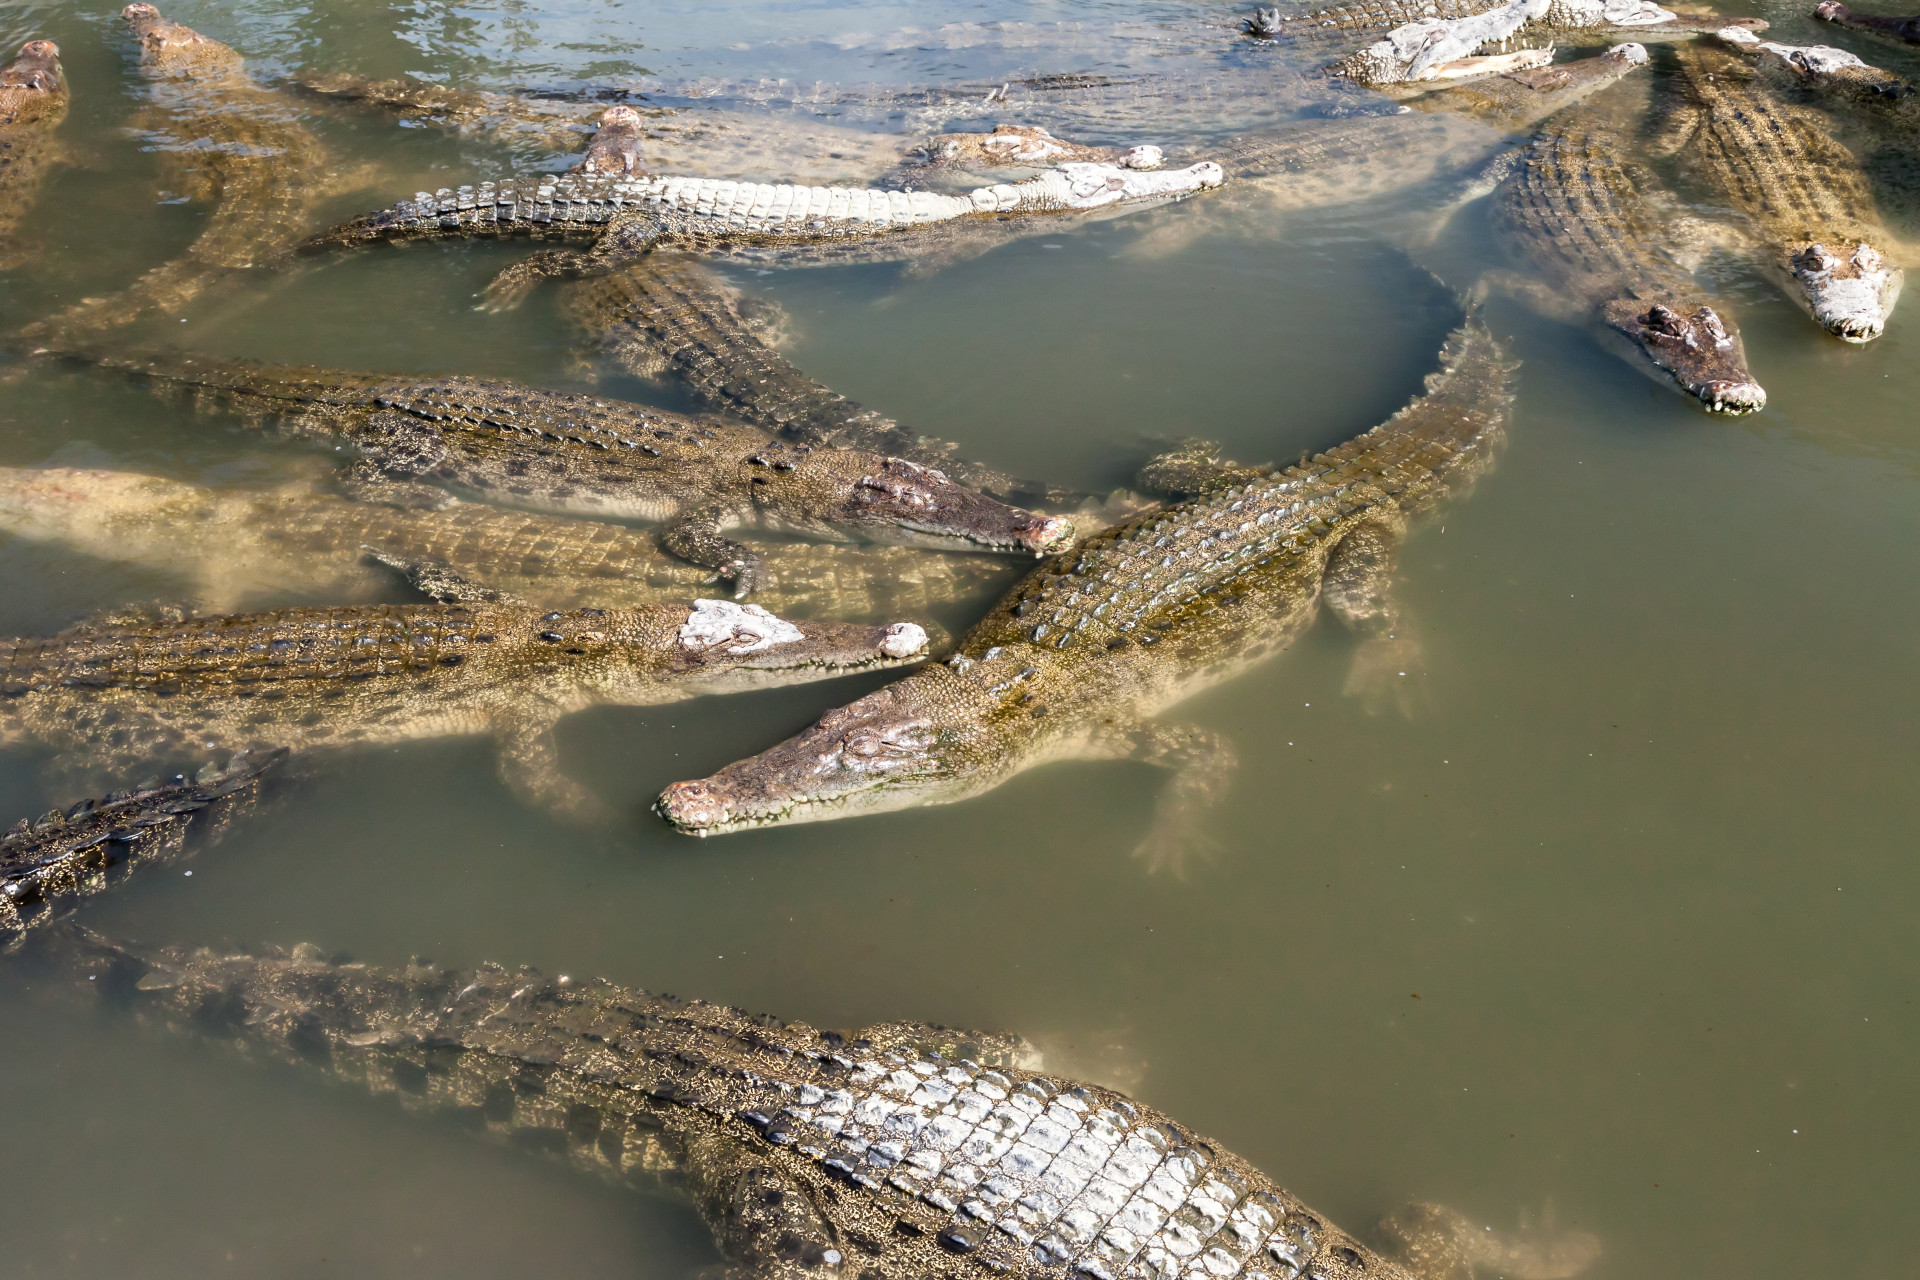 Be careful at Oniyama Jigoku! As its name suggests, this spring is home to crocodiles and other animals, like snakes!<p>You may also like:<a href="https://www.starsinsider.com/n/418144?utm_source=msn.com&utm_medium=display&utm_campaign=referral_description&utm_content=183441v2en-ae"> Lizzo: The defining star of the moment</a></p>